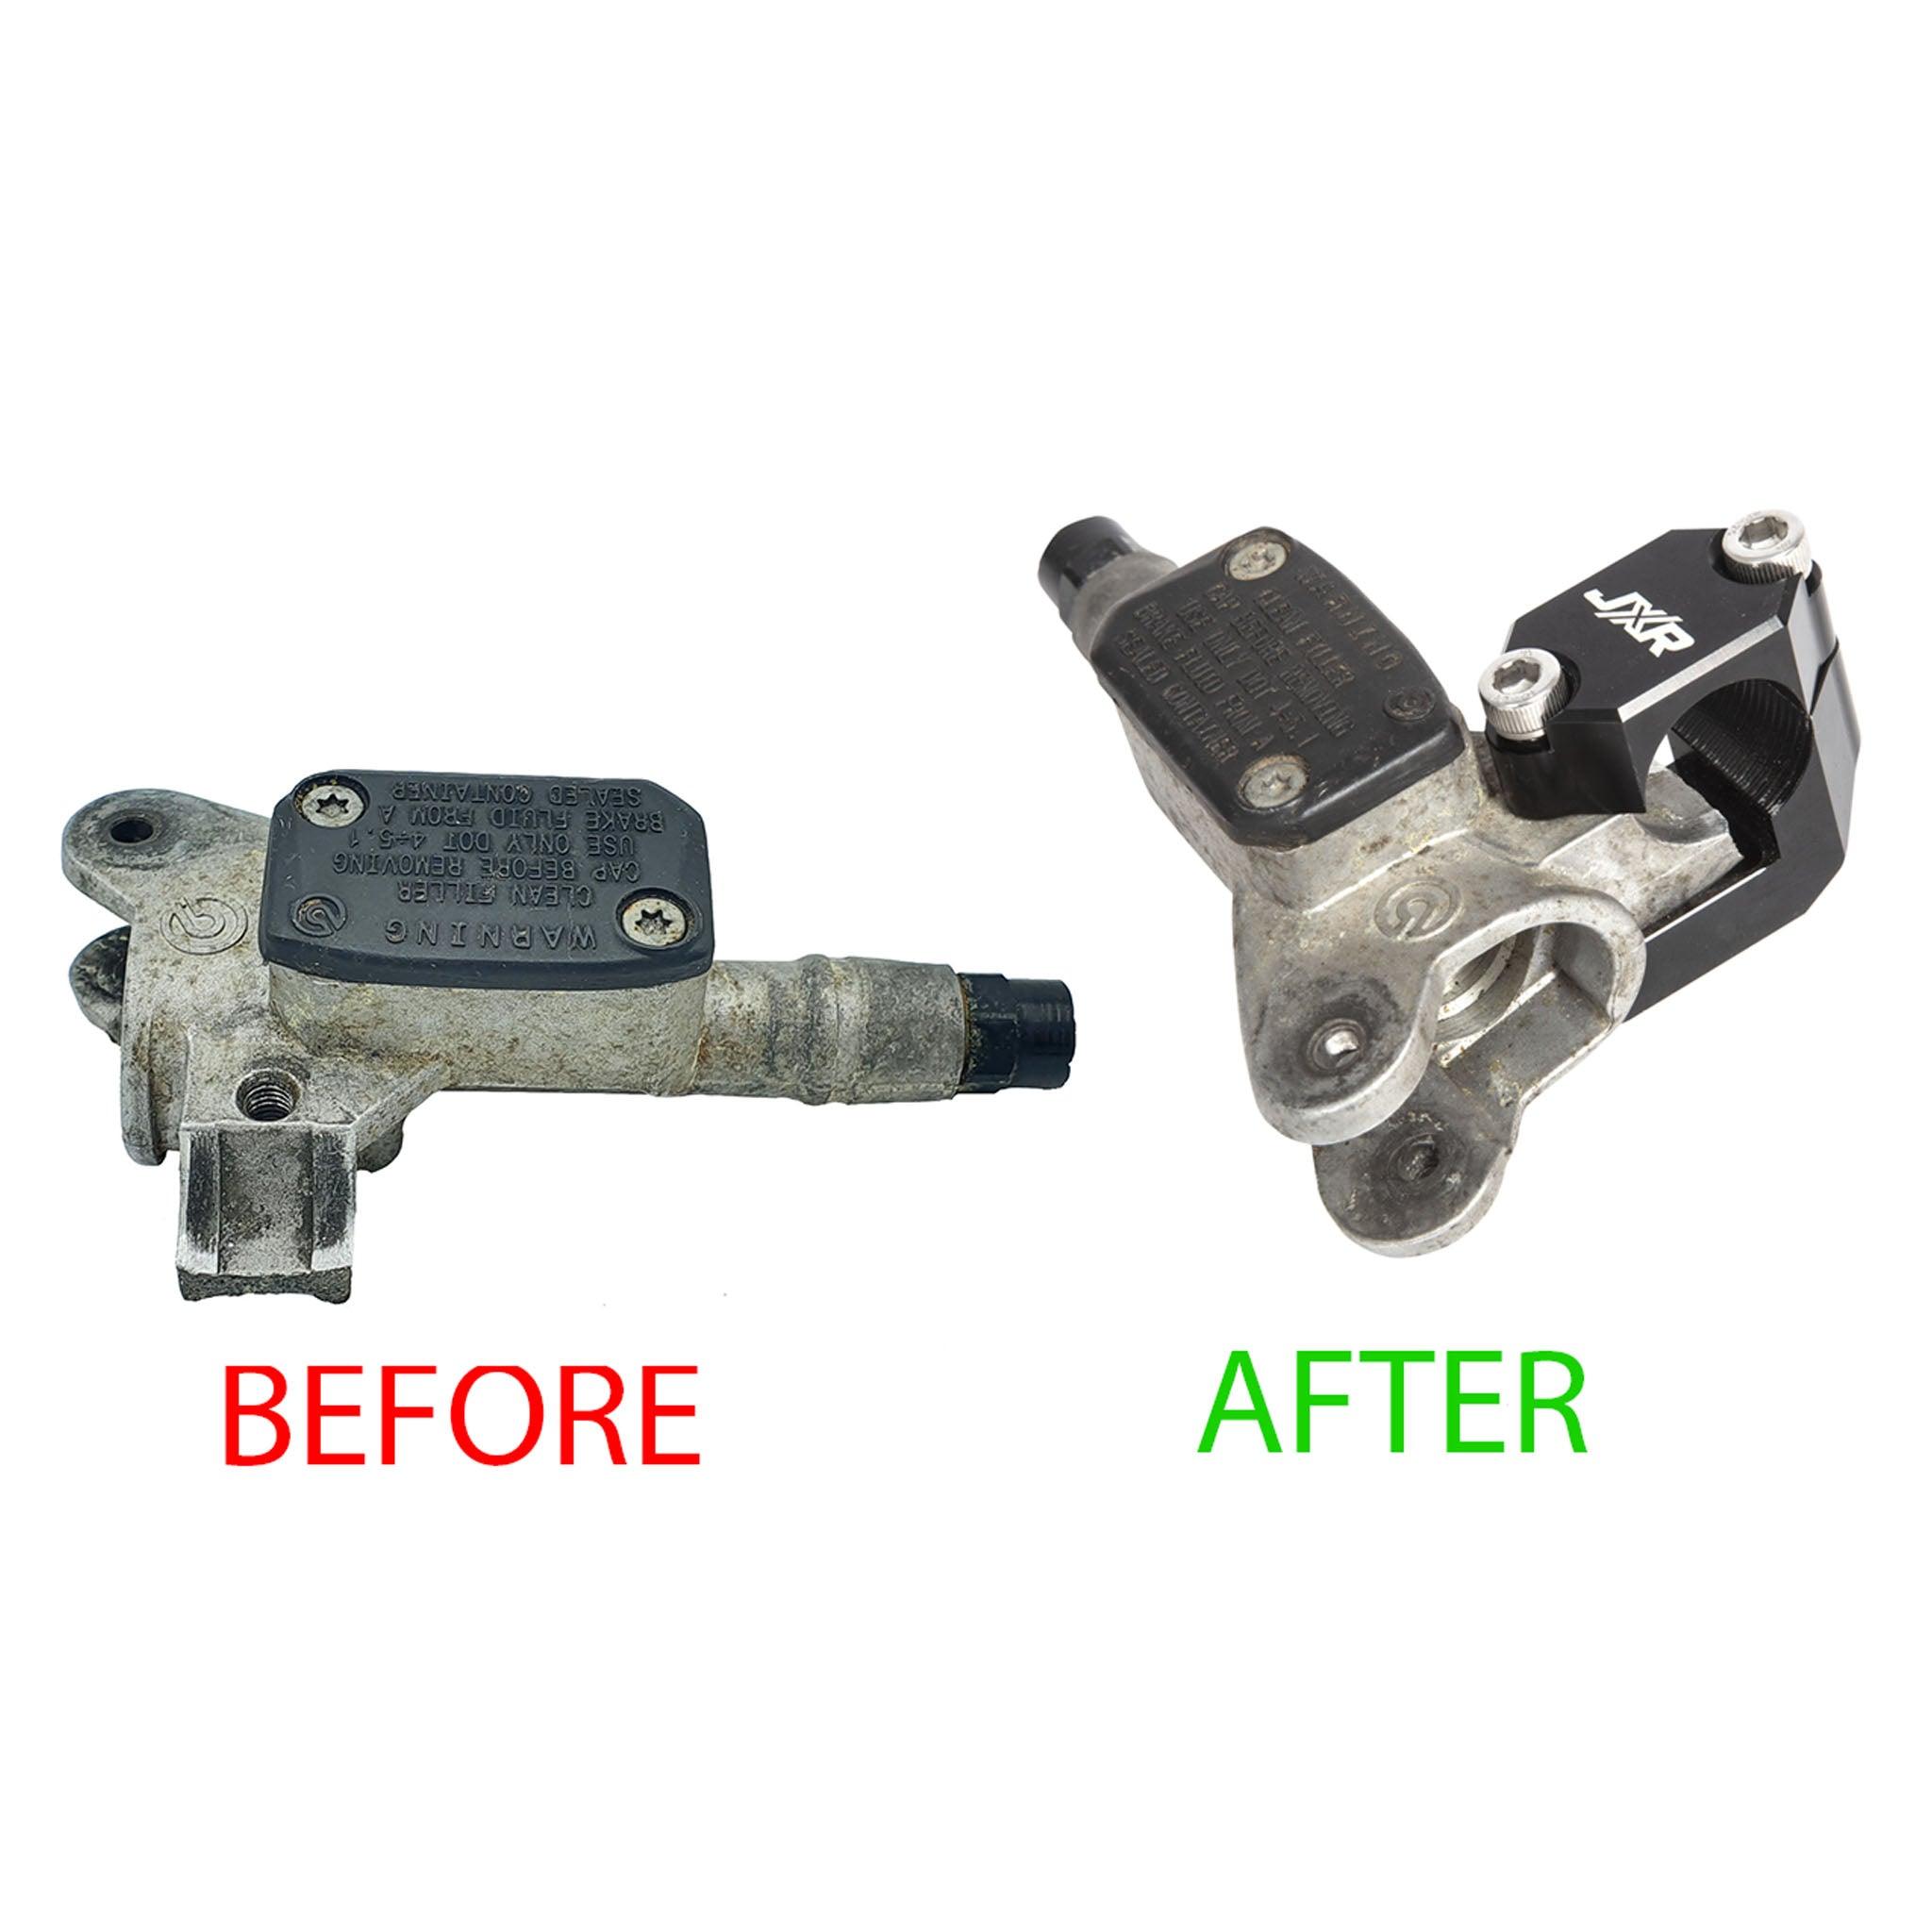 Showing before and after the kit was used to fix a snapped master cylinder 